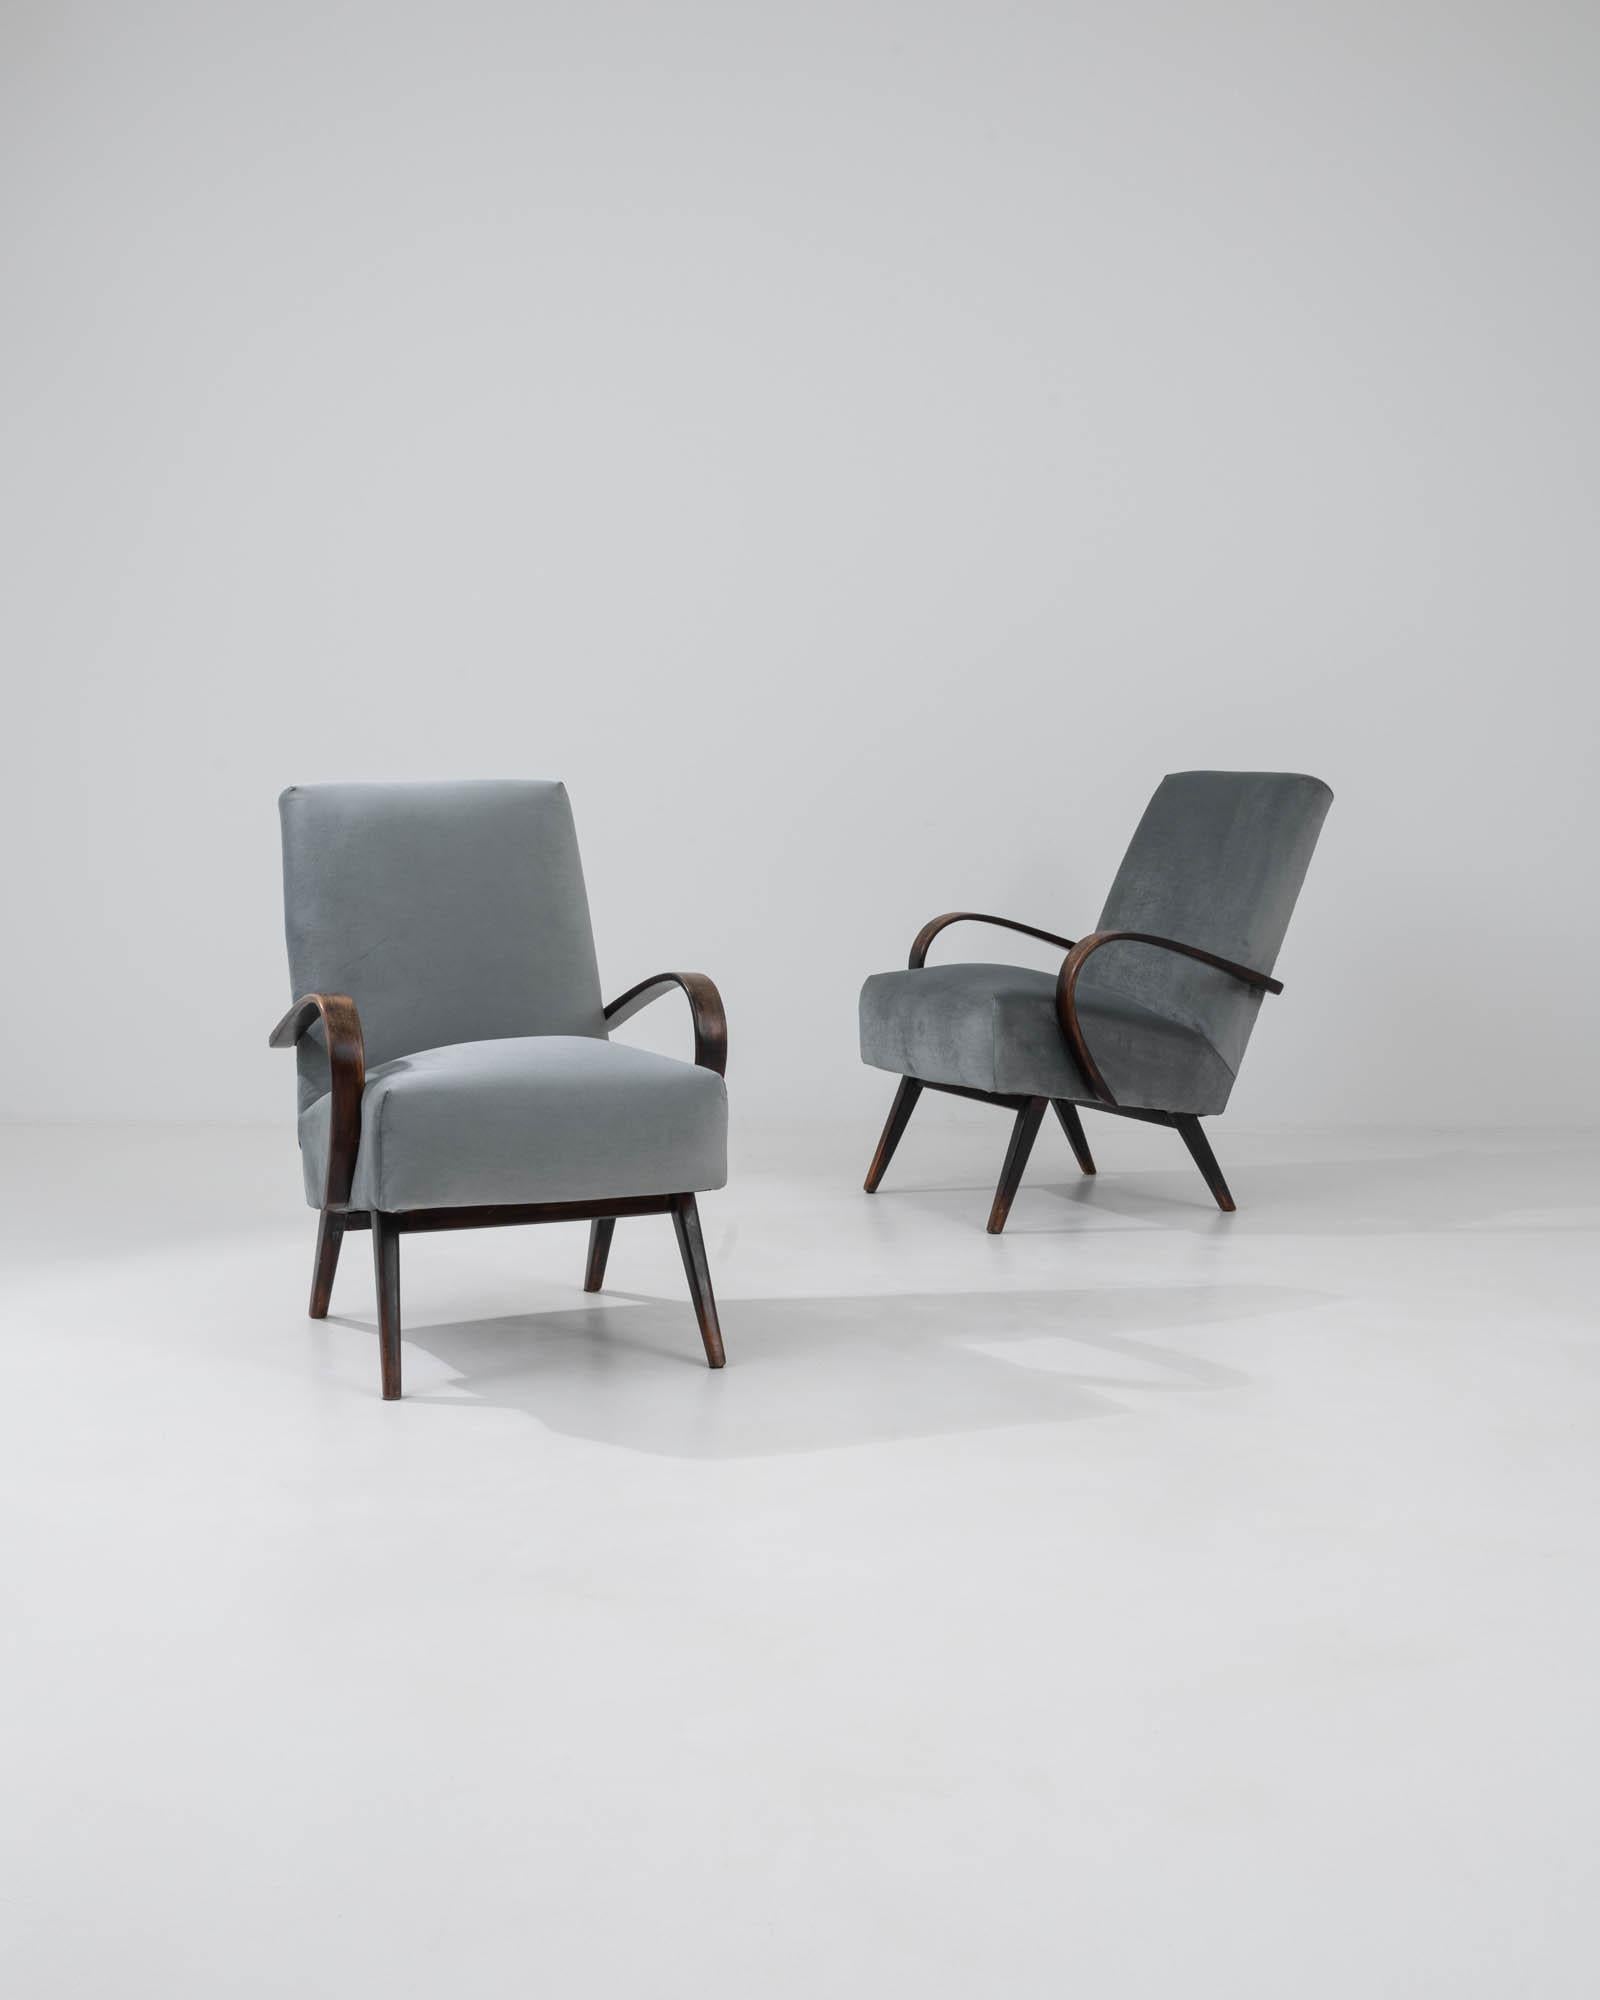 Step into a realm of timeless elegance with this pair of 1960s Czech armchairs by the renowned designer J. Halabala. Exquisitely upholstered in a serene shade of grey, these chairs encapsulate the essence of mid-century modern design with their